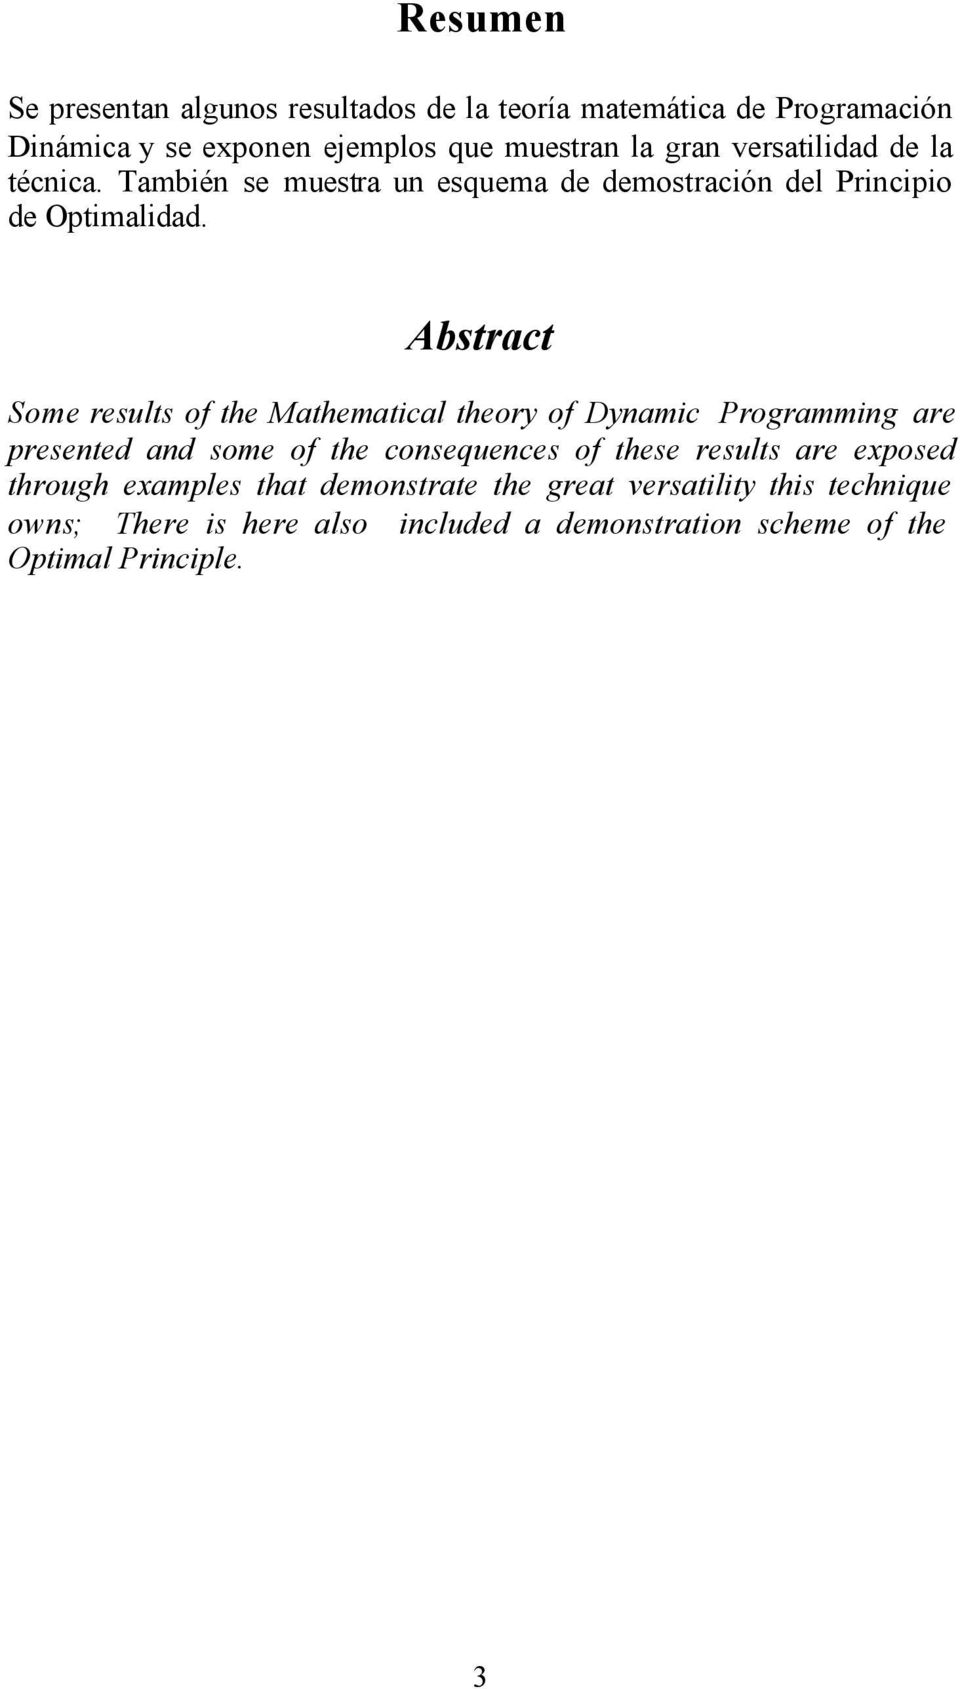 Abstract Some results of the Mathematcal theory of Dyamc Programmg are preseted ad some of the cosequeces of these